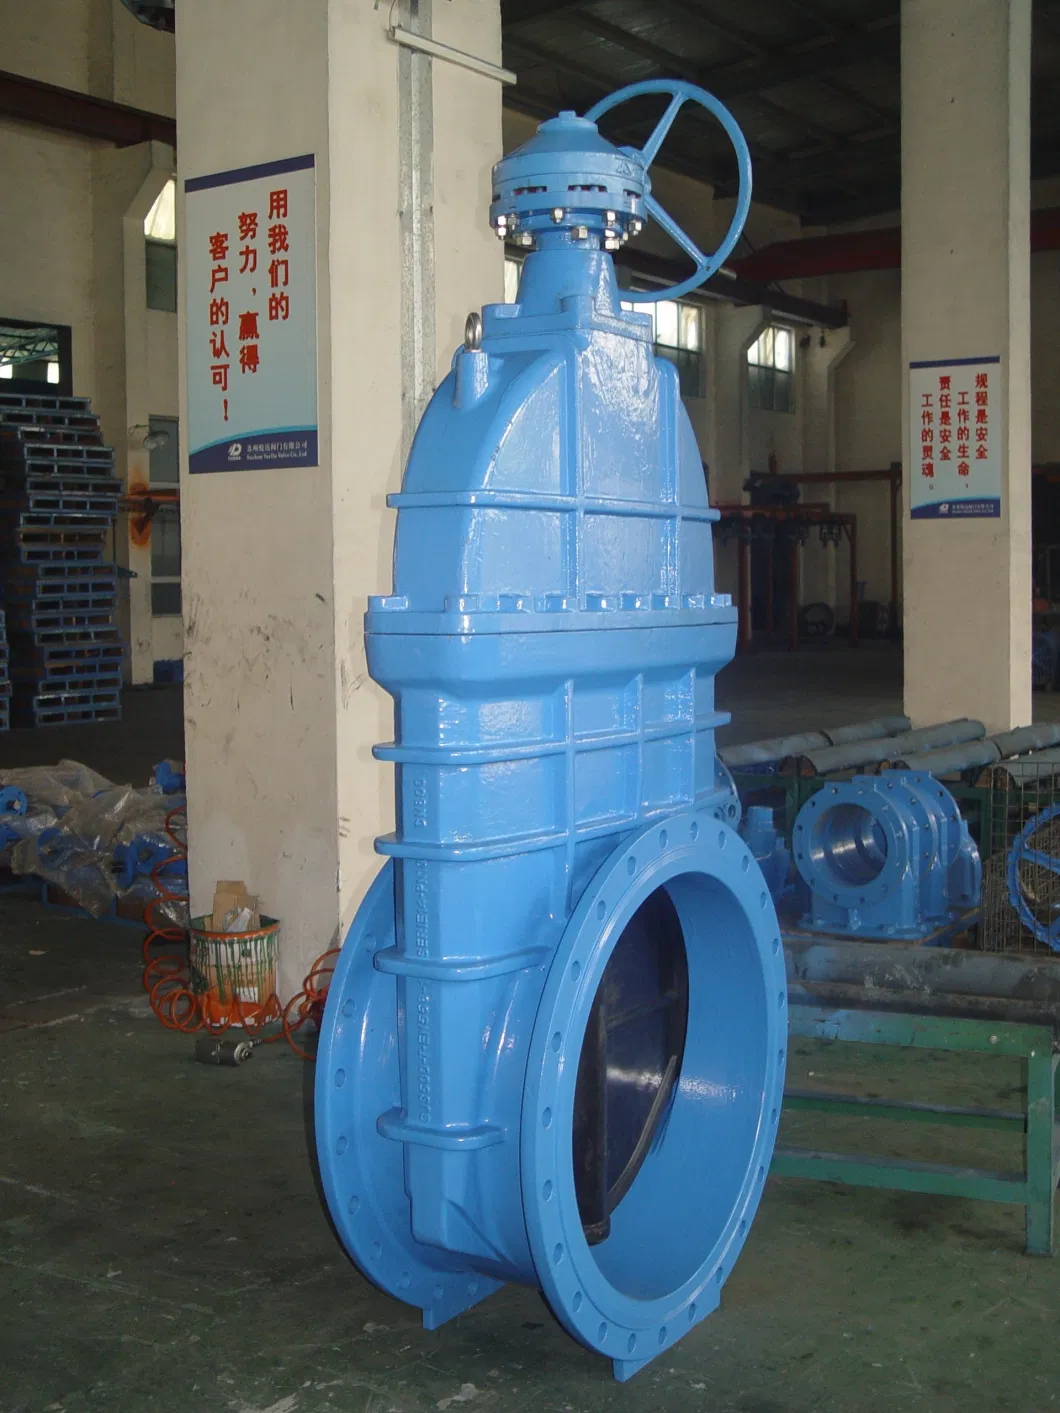 Double Flange Resilient Seated Gate Valve with Gearbox Dn500-Dn800